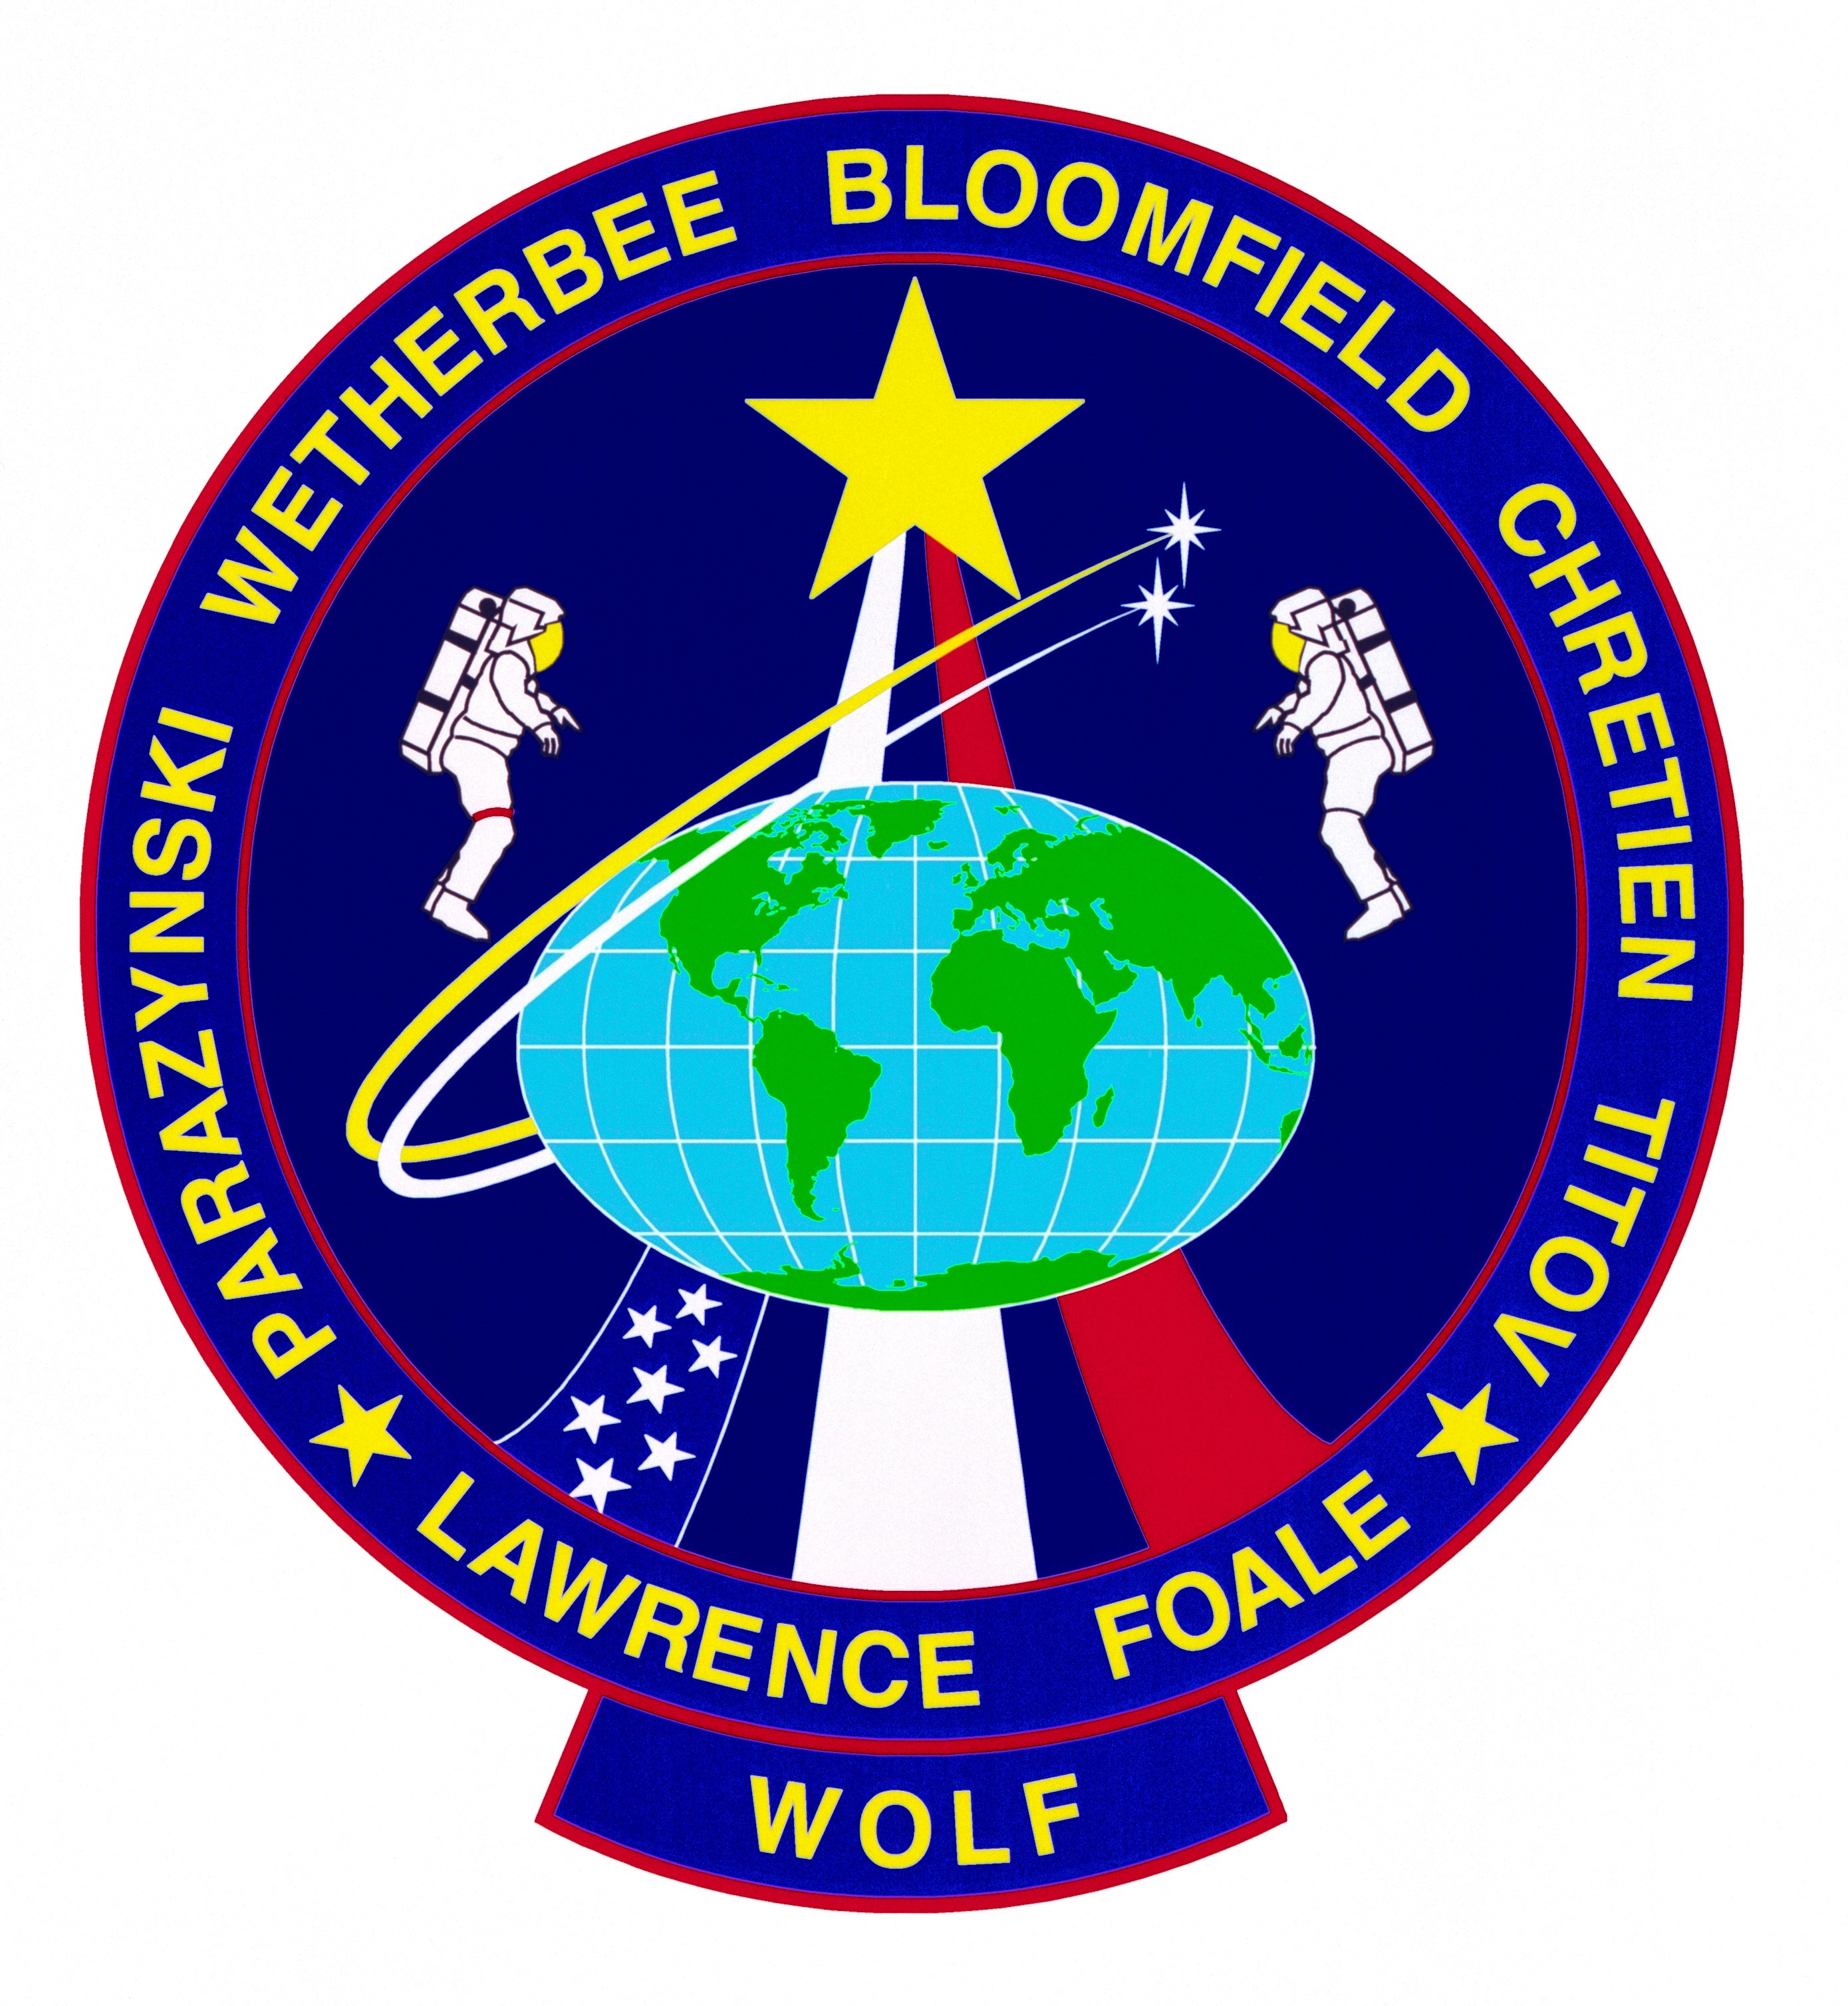 STS-86 crew patch. The flags for the three nations represented on the flight are incorporated in the design and the names of the astronauts ring the patch.